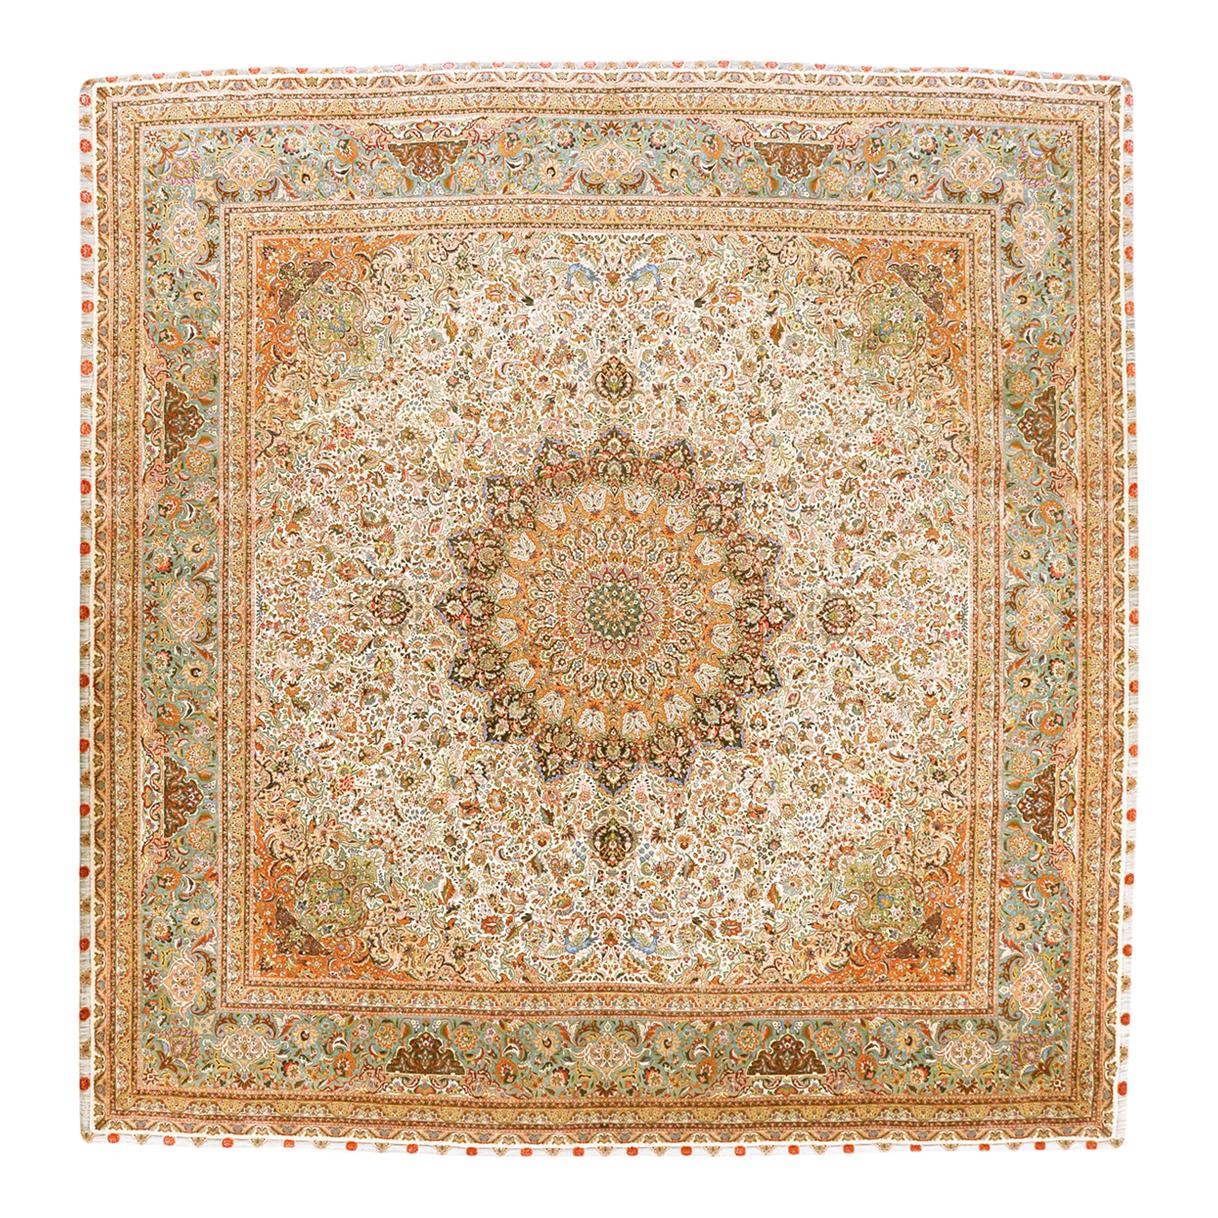 Square Antique Persian Tabriz Rug with Colorful Spring Floral Details